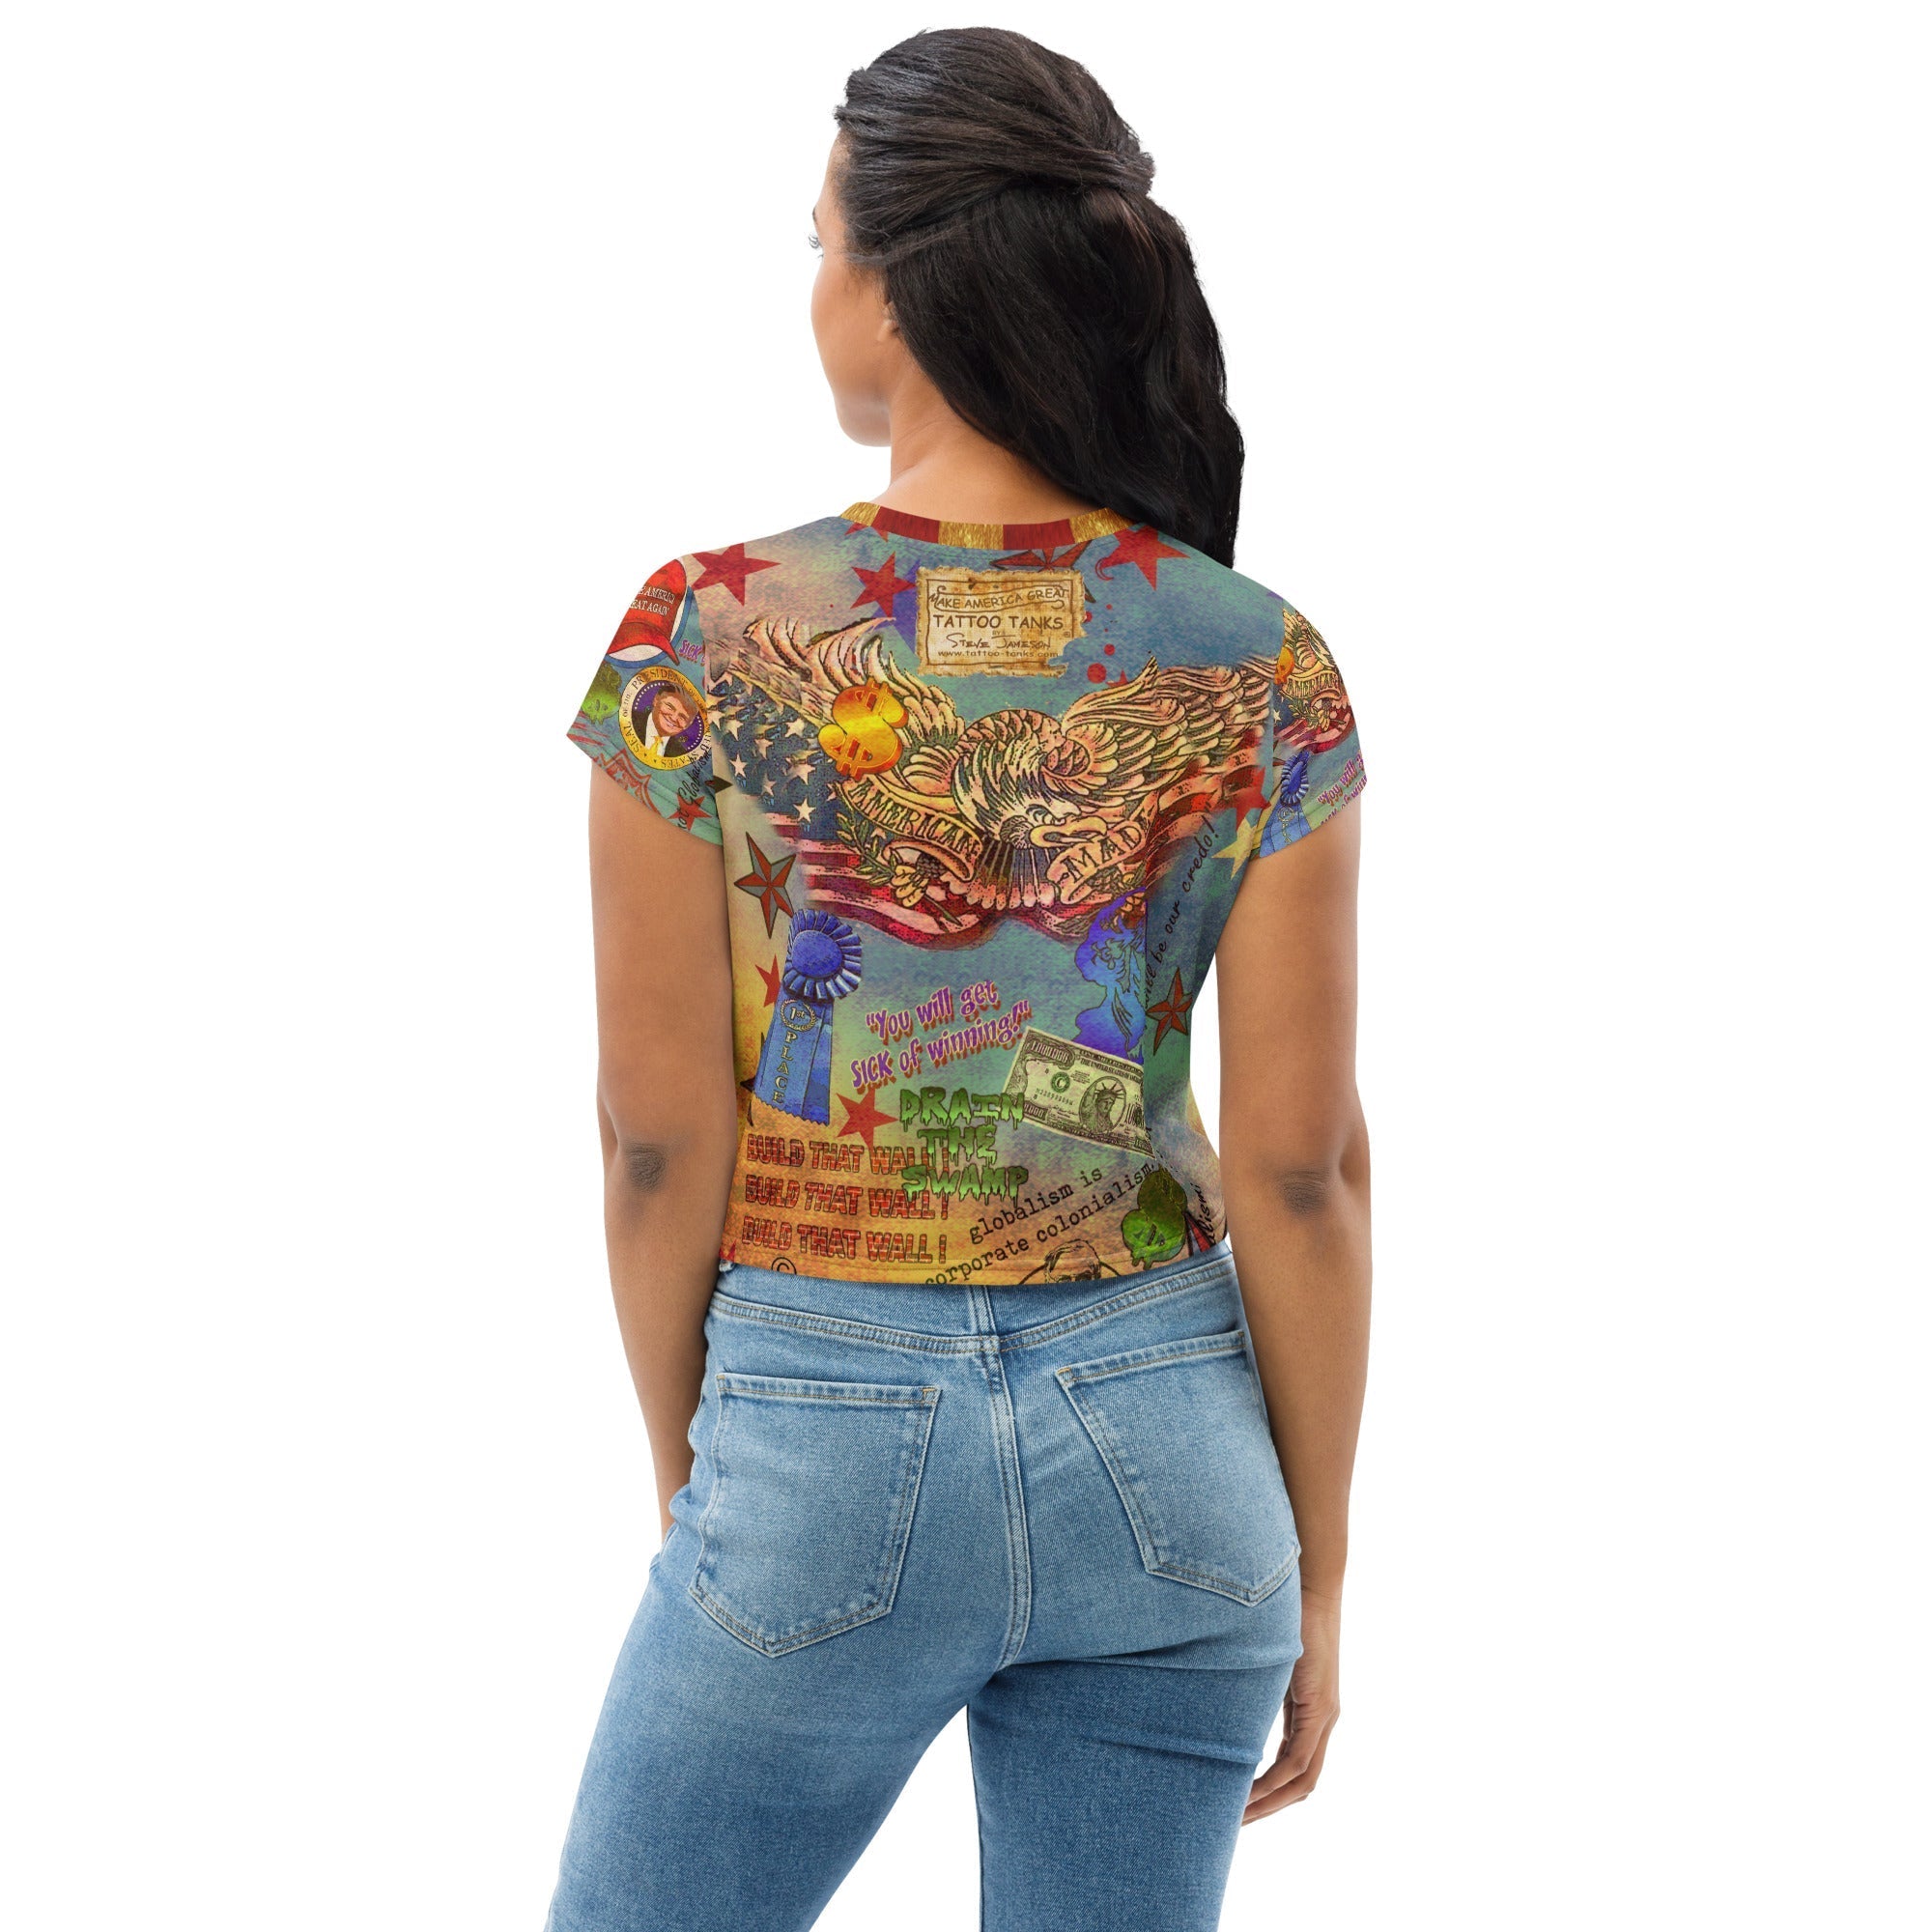 THE MAGA CROP TOP" for women – TEES